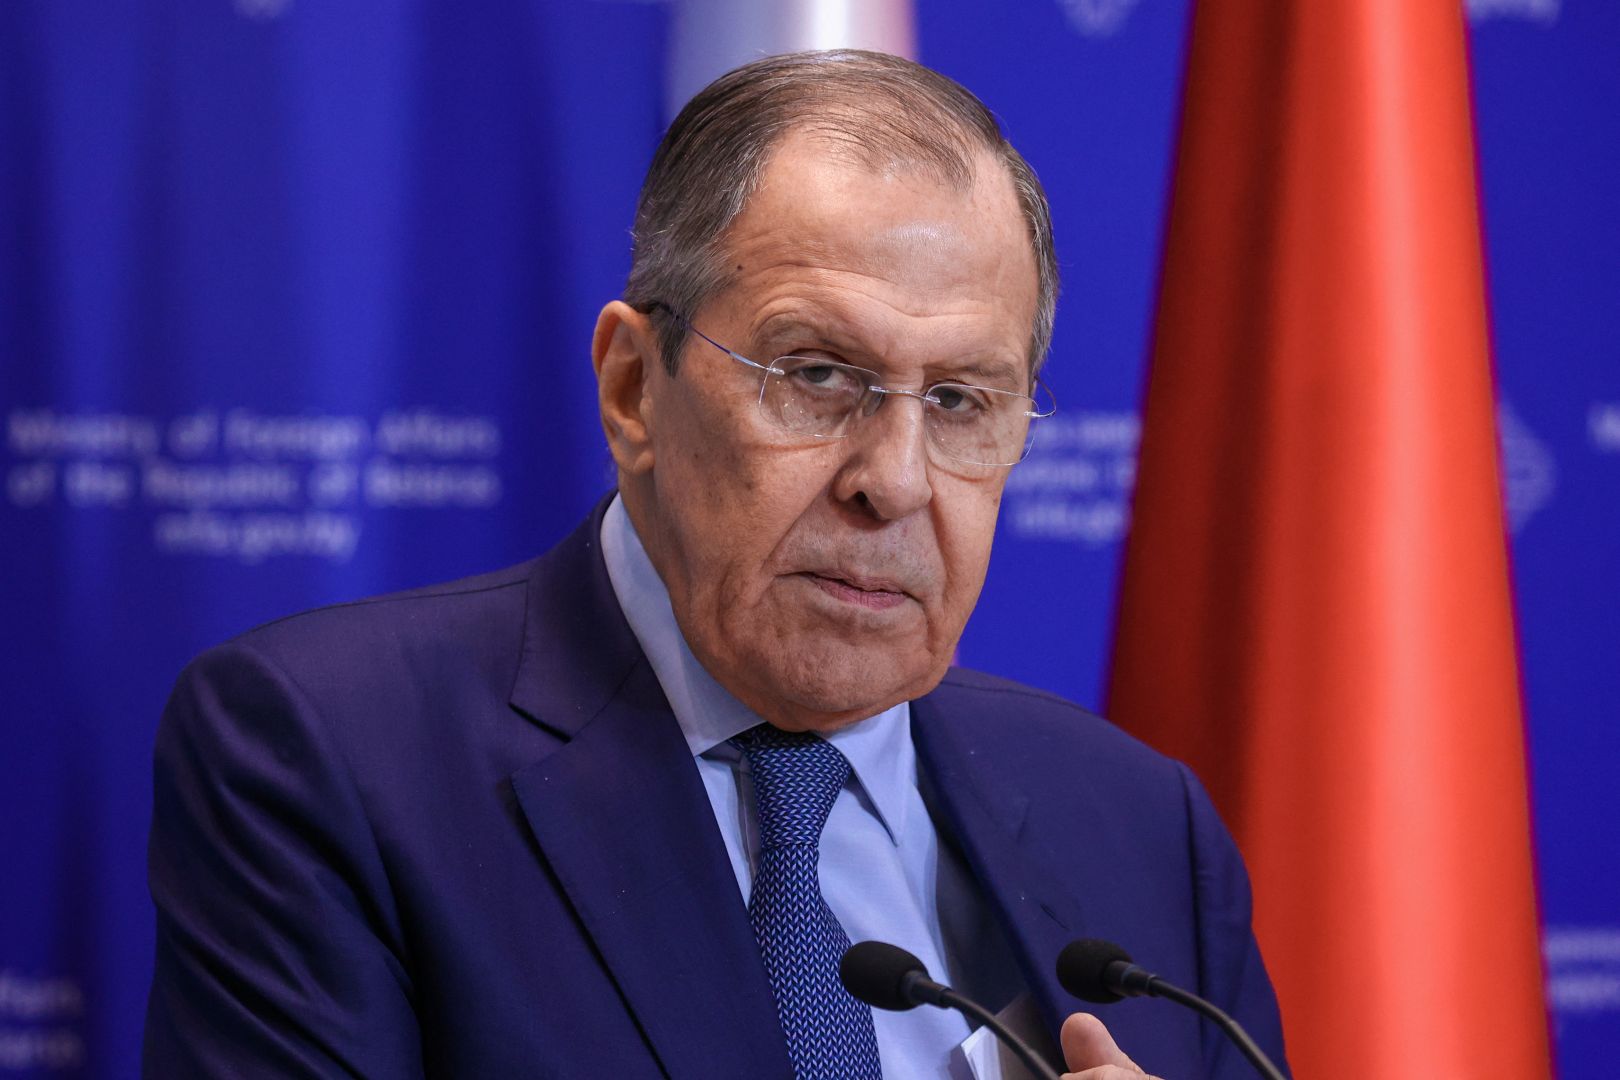 Lavrov: West's main priority is to disrupt Russia's cooperation with CIS countries